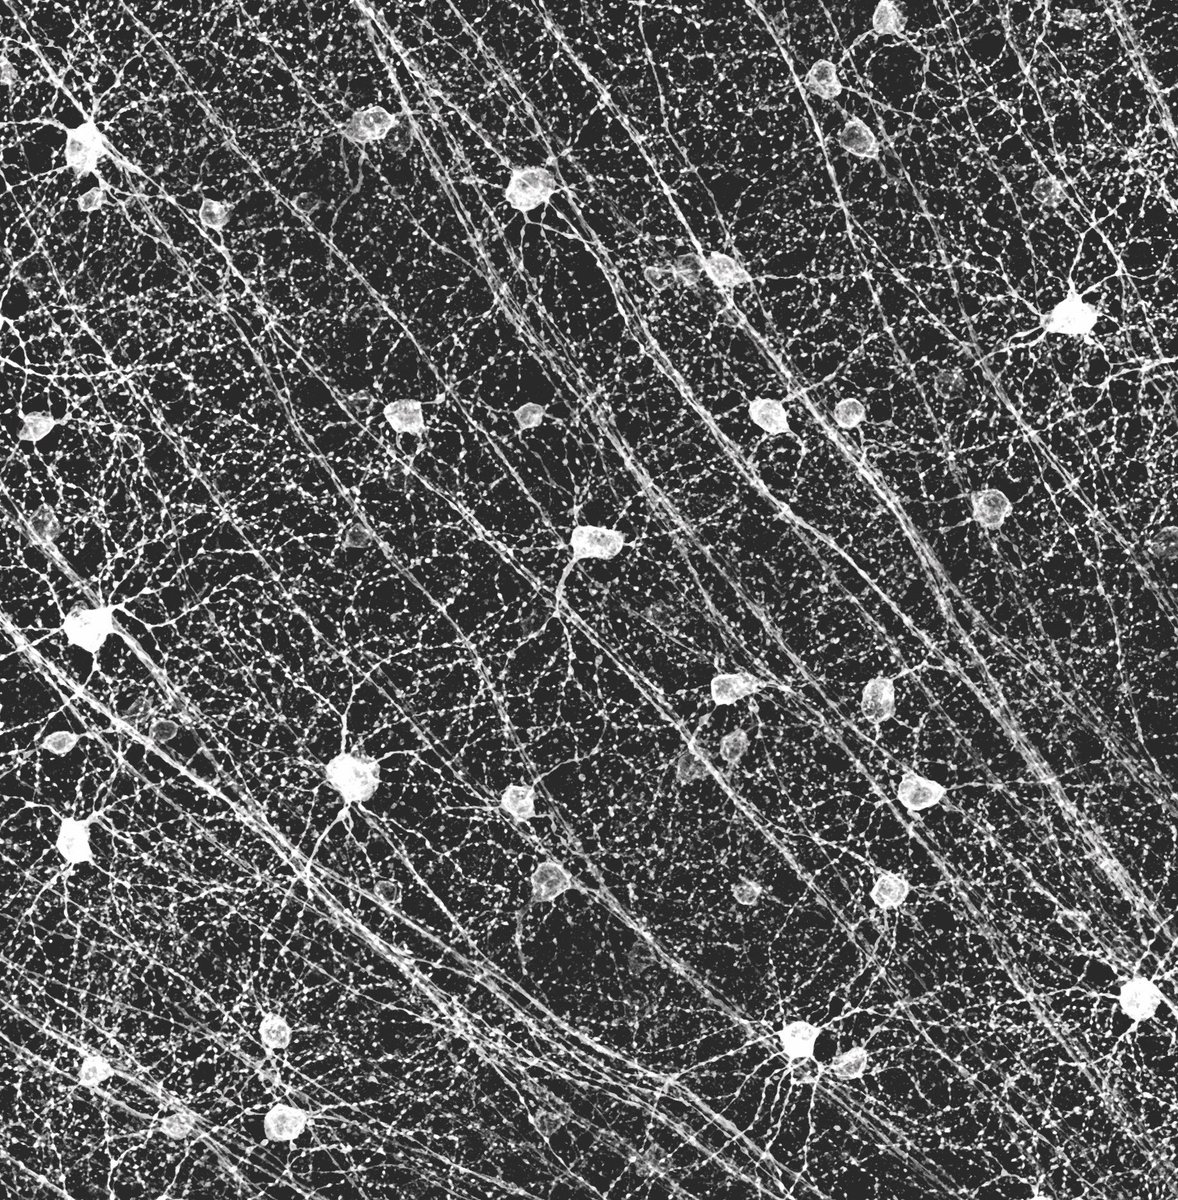 M2 and M4 ipRGCs in the mouse retina 👁️🐭